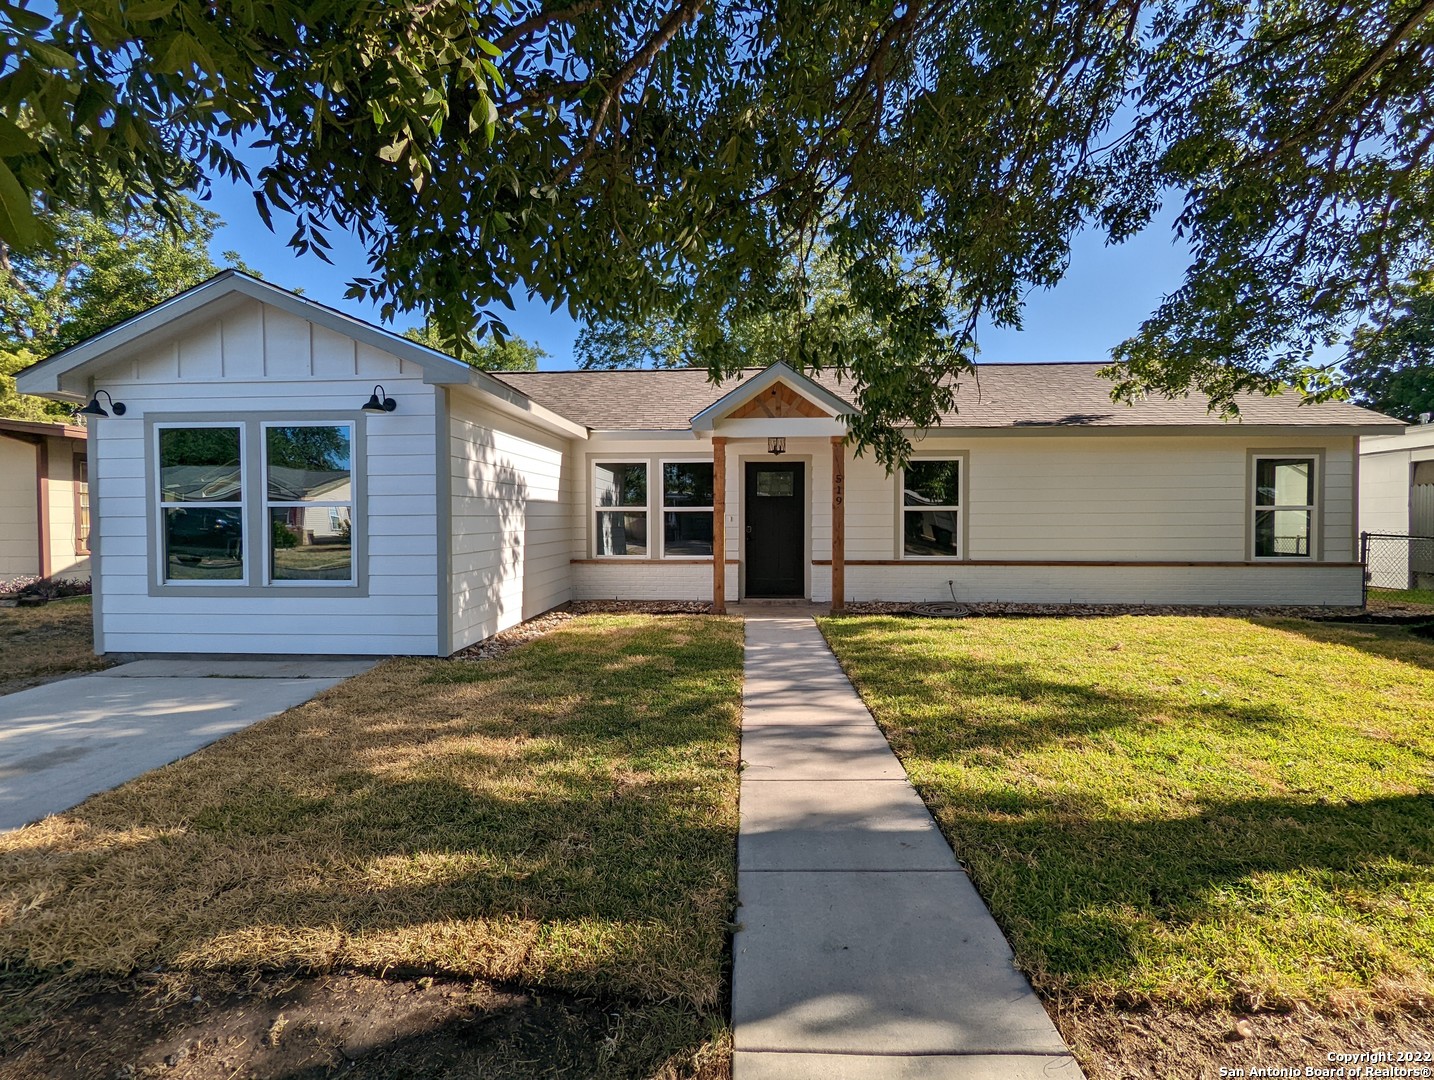 Completely remodeled home in desirable Bellaire Subdivision. This home was taken down to the studs and fully revamped. Roof pitch was changed, new flooring, cabinets, added full bath and flex space that can be made into an office or second living area.